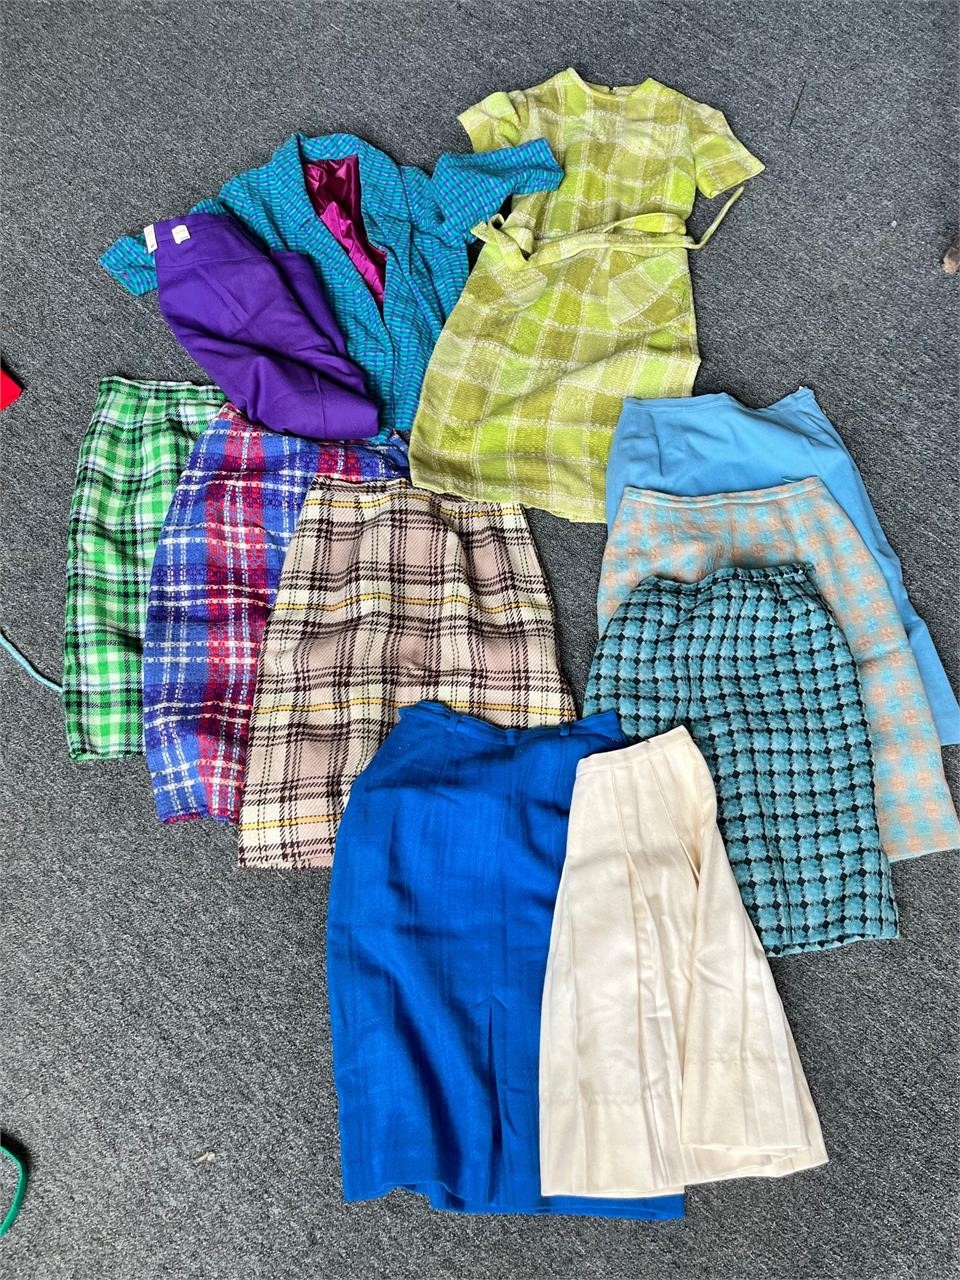 1960's skirts and more